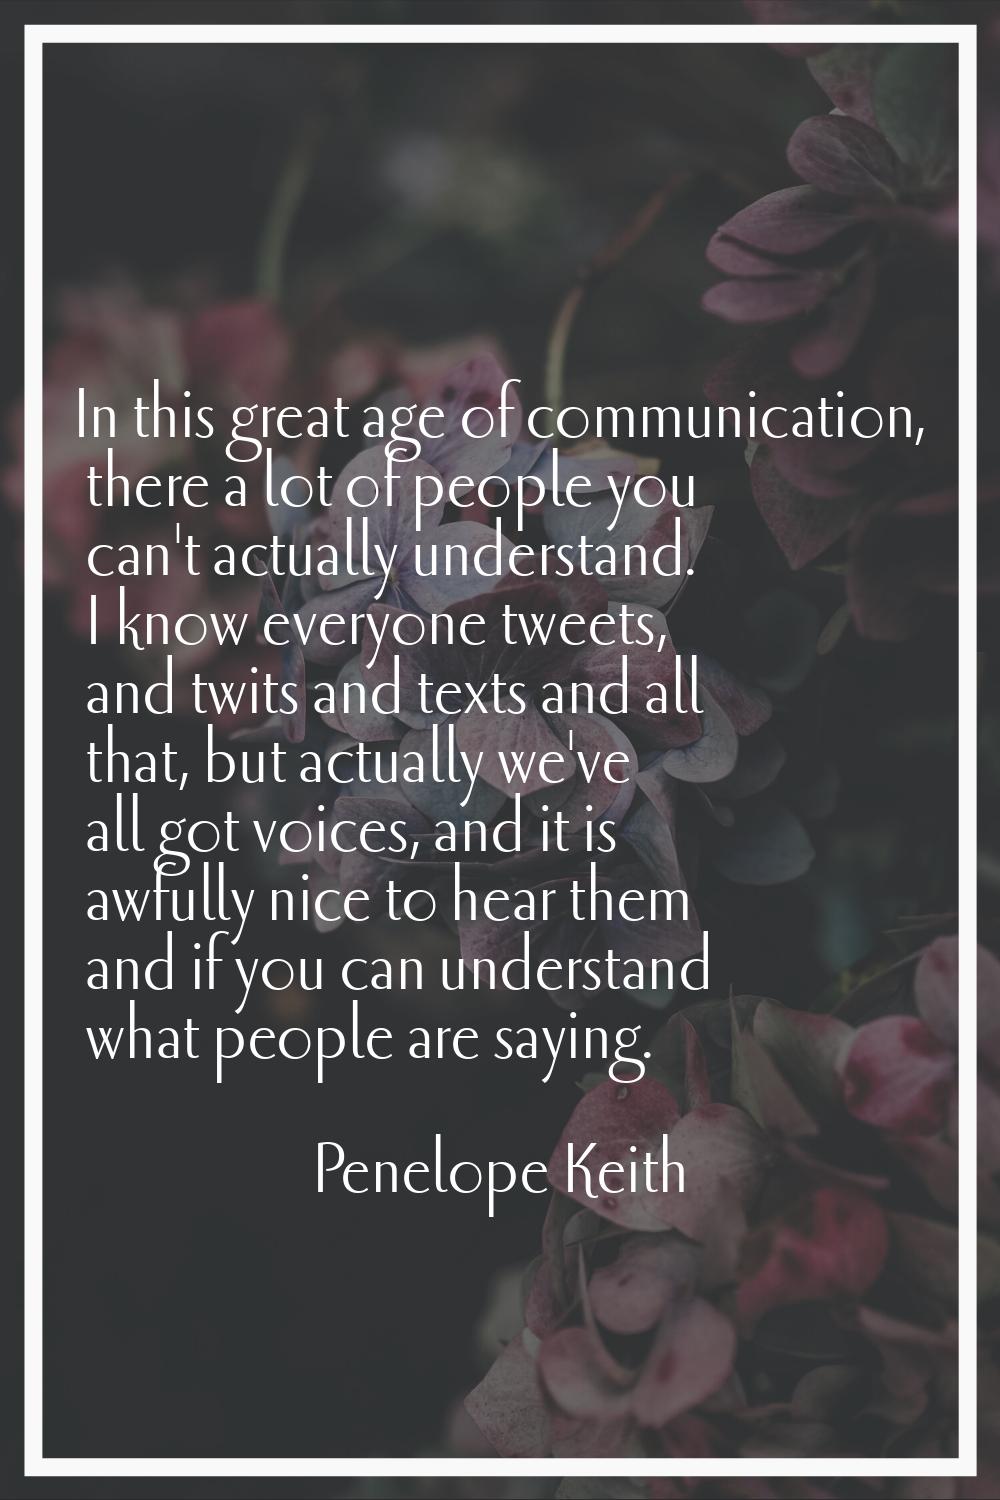 In this great age of communication, there a lot of people you can't actually understand. I know eve